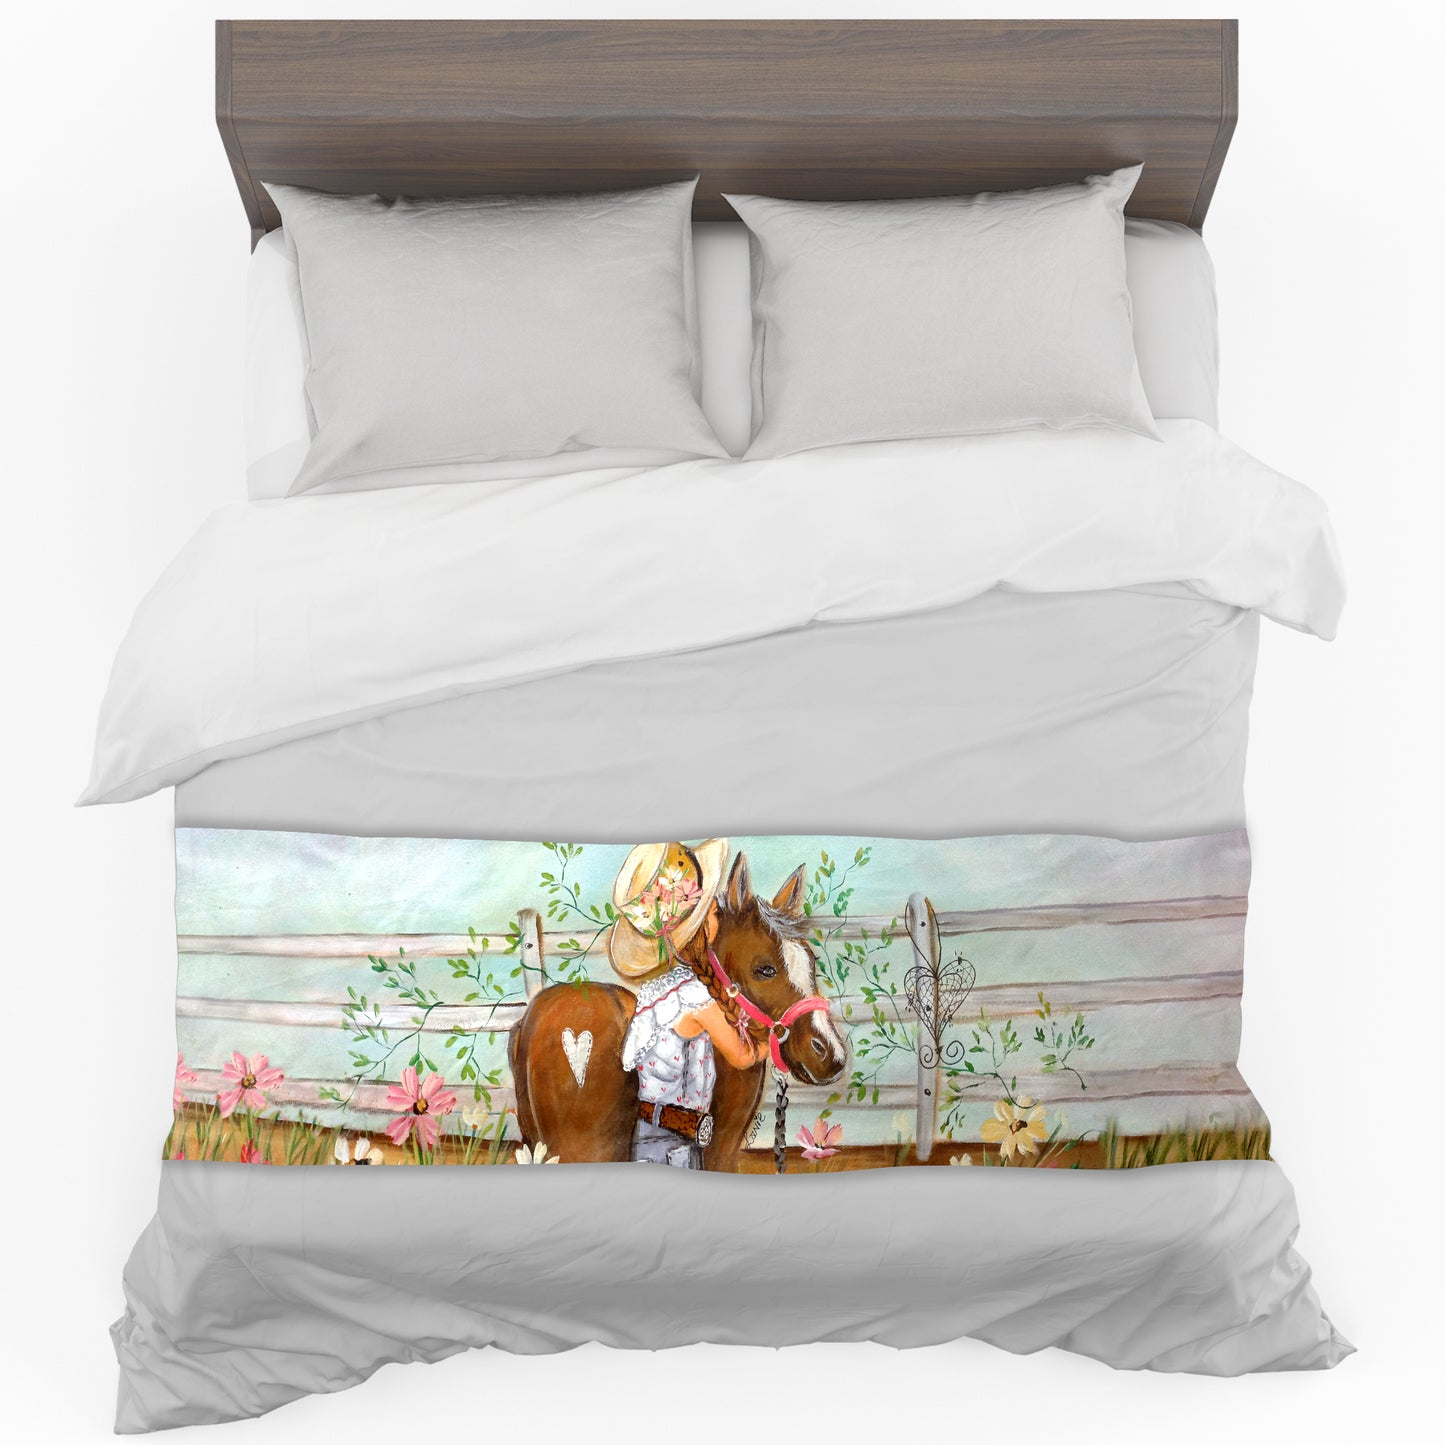 Donkey Cosmos Girl By Lanie Wolvaardt Bed Runner and Optional Pillowcases